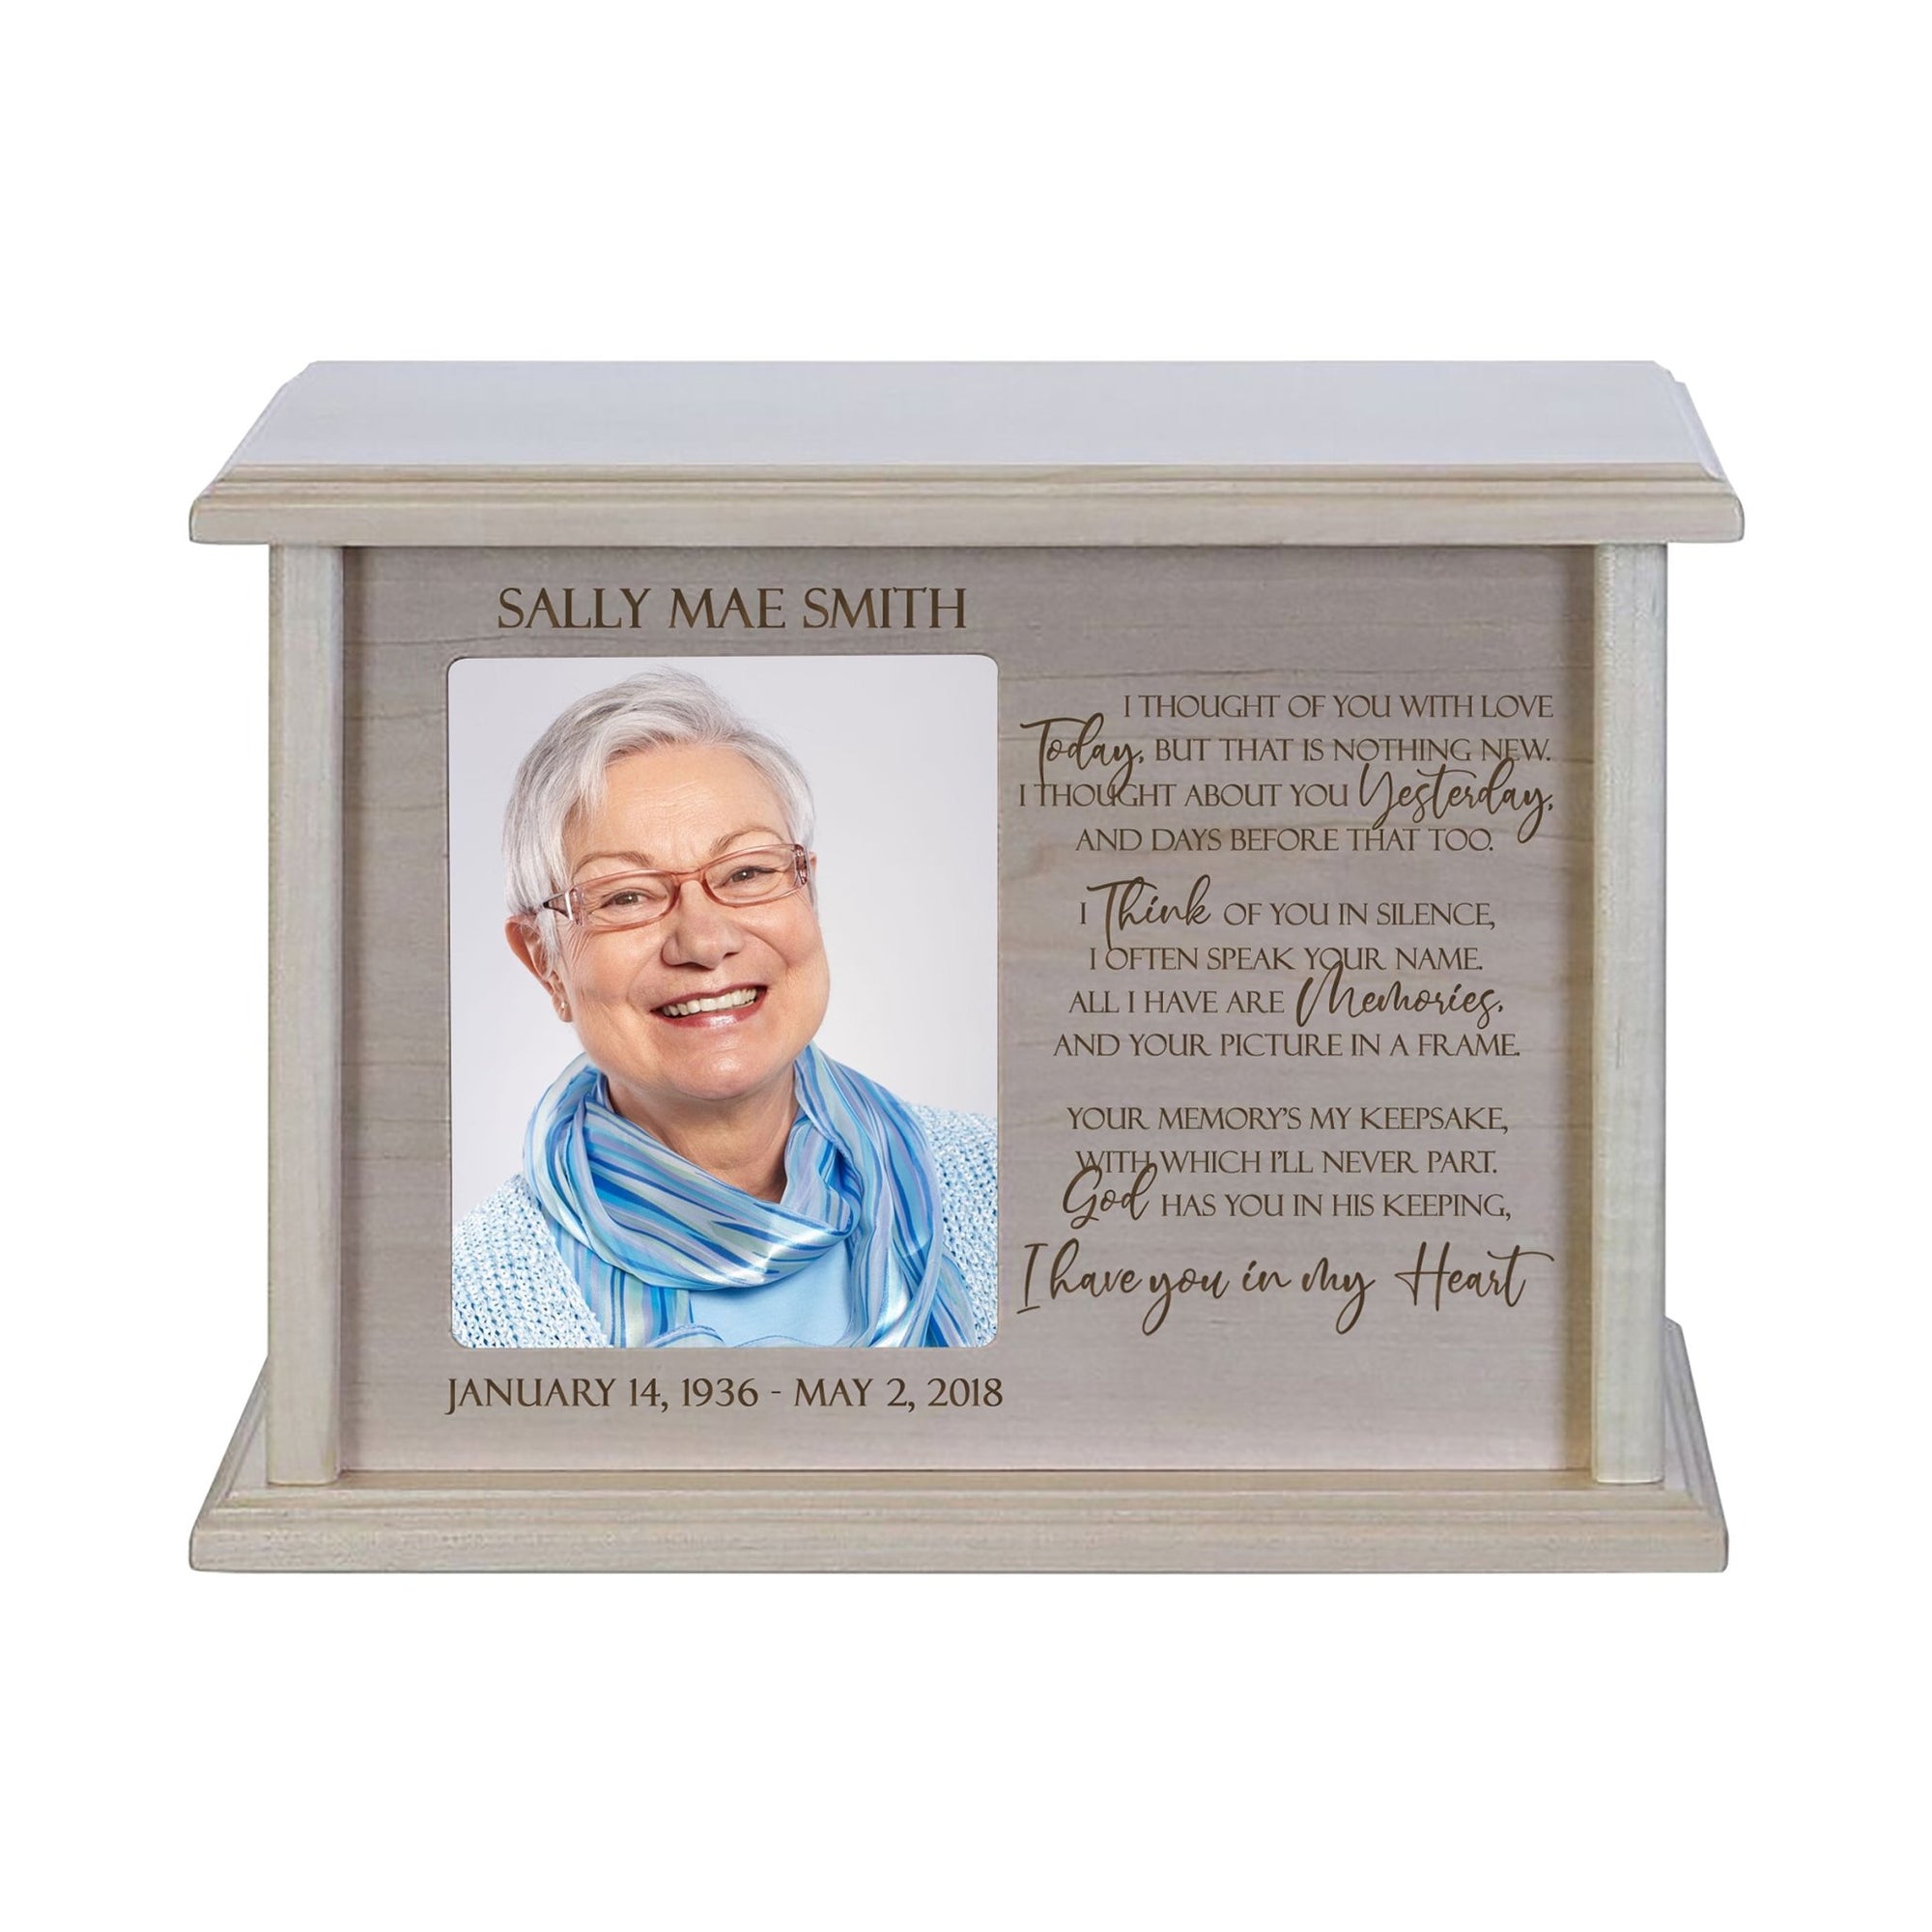 Custom Engraved Cherry Wood Urn Box with 4x5 Photo holds 262 cu in of Human Ashes I Thought Of You With Love - LifeSong Milestones